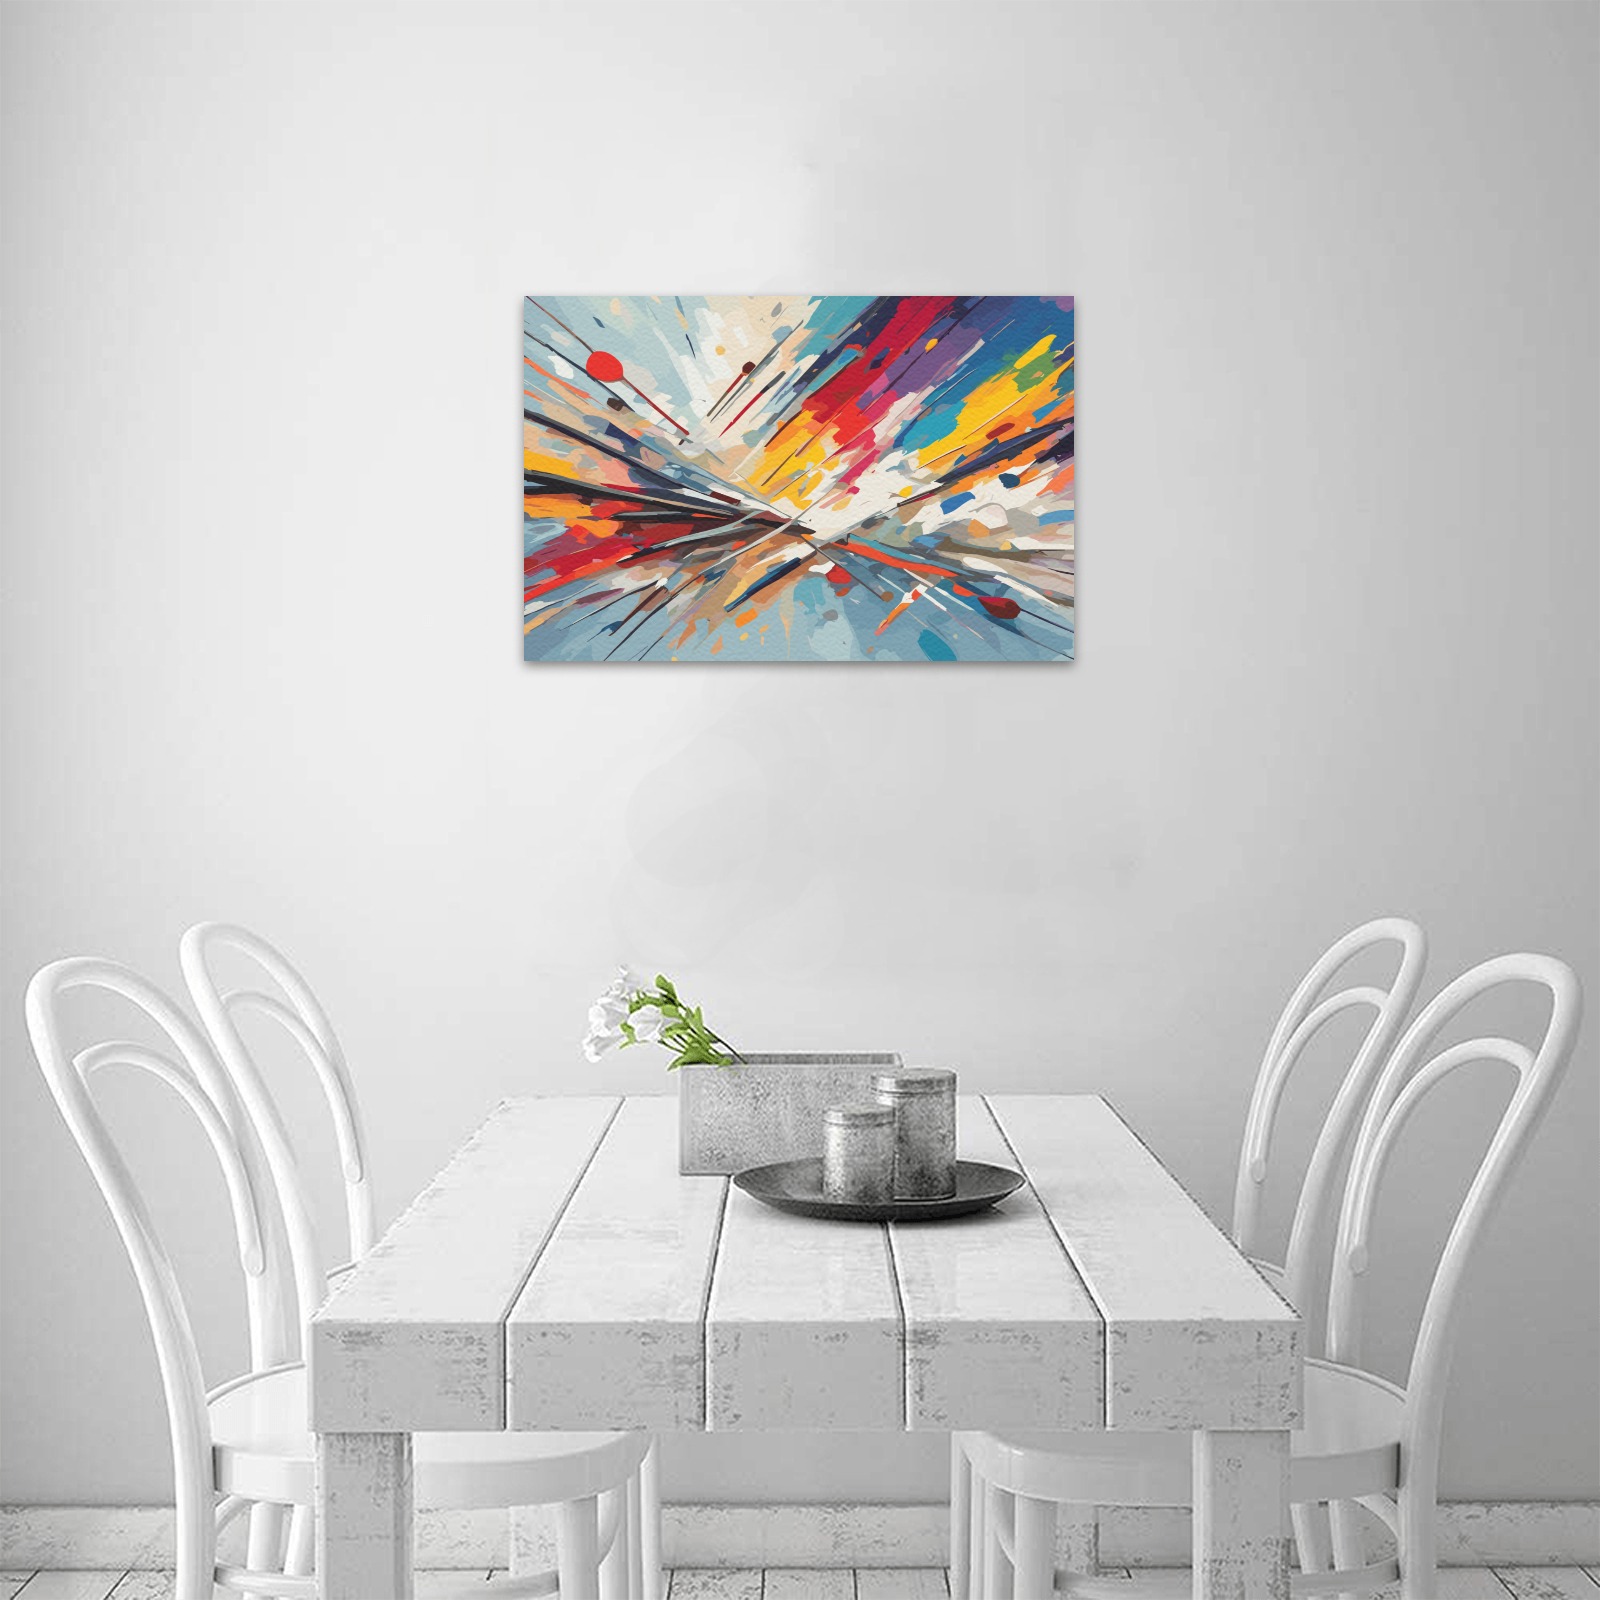 Artistic abstract art of colors on blue and beige Upgraded Canvas Print 18"x12"